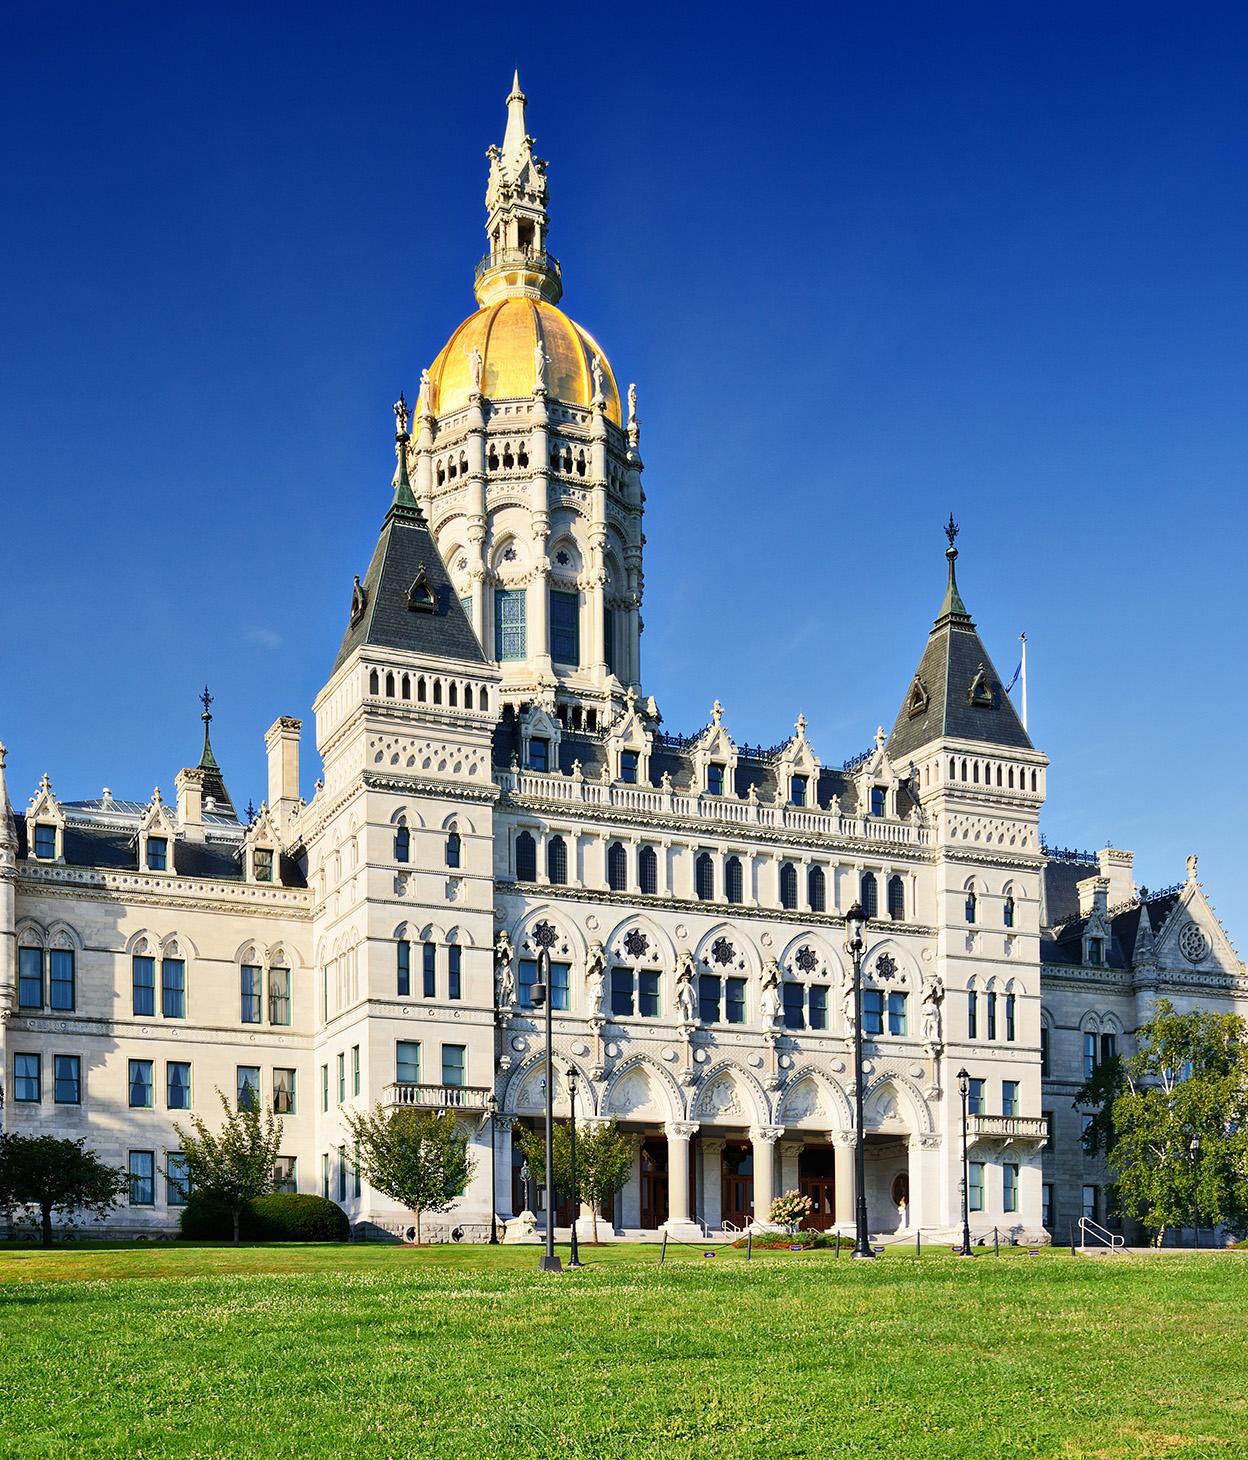 Connecticut State Capitol in Hartford, Connecticut.